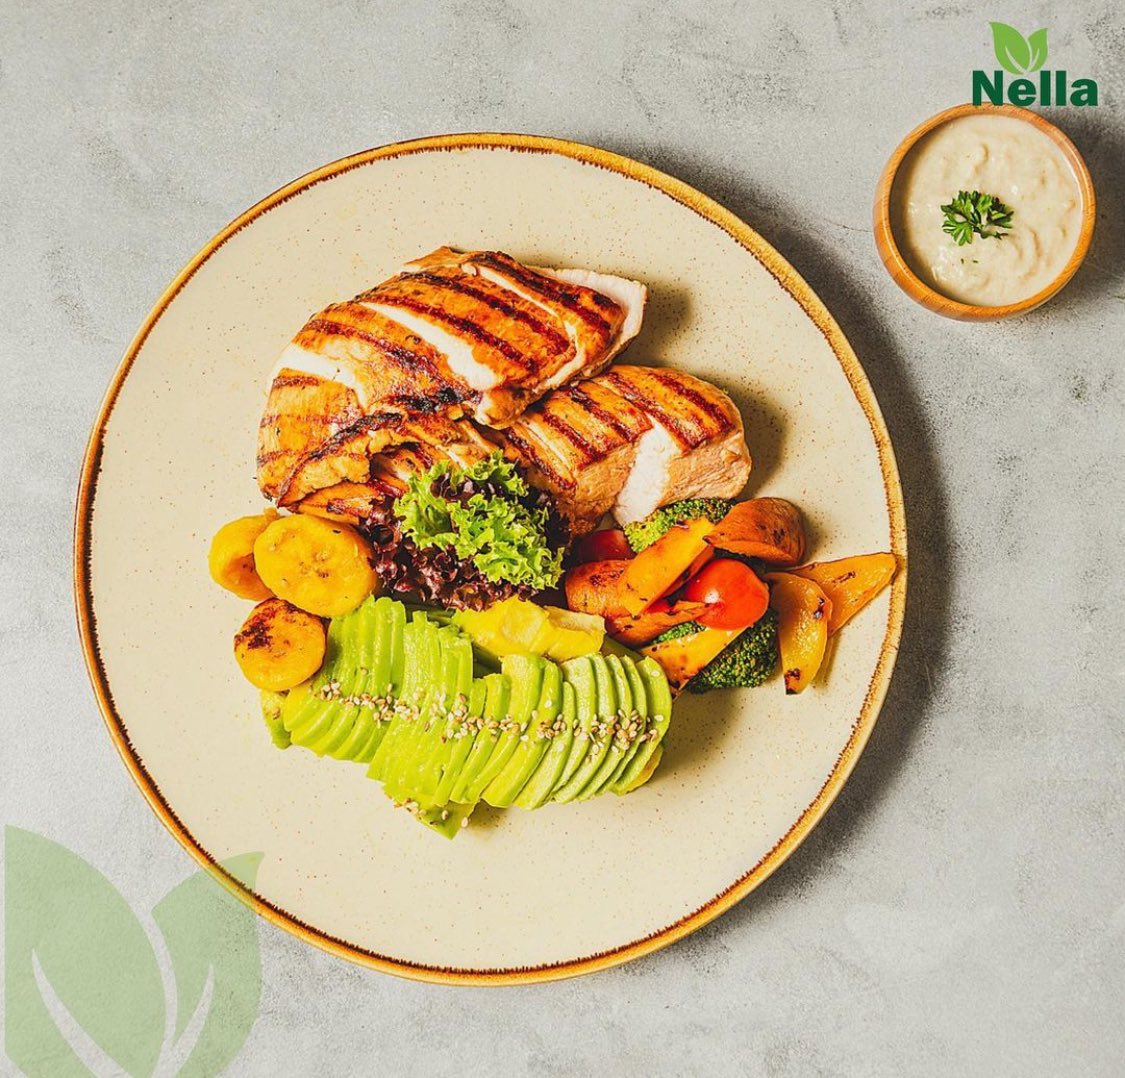 Fuel your Friday with our Ultimate Chicken Meal! Experience the mouthwatering harmony of grilled chicken, lentils, creamy avocado, and a colorful medley of veggies. Balancing taste and nutrition, this feast is yours for just UGX 28,000. #SavorTheFlavors #HealthyIndulgence